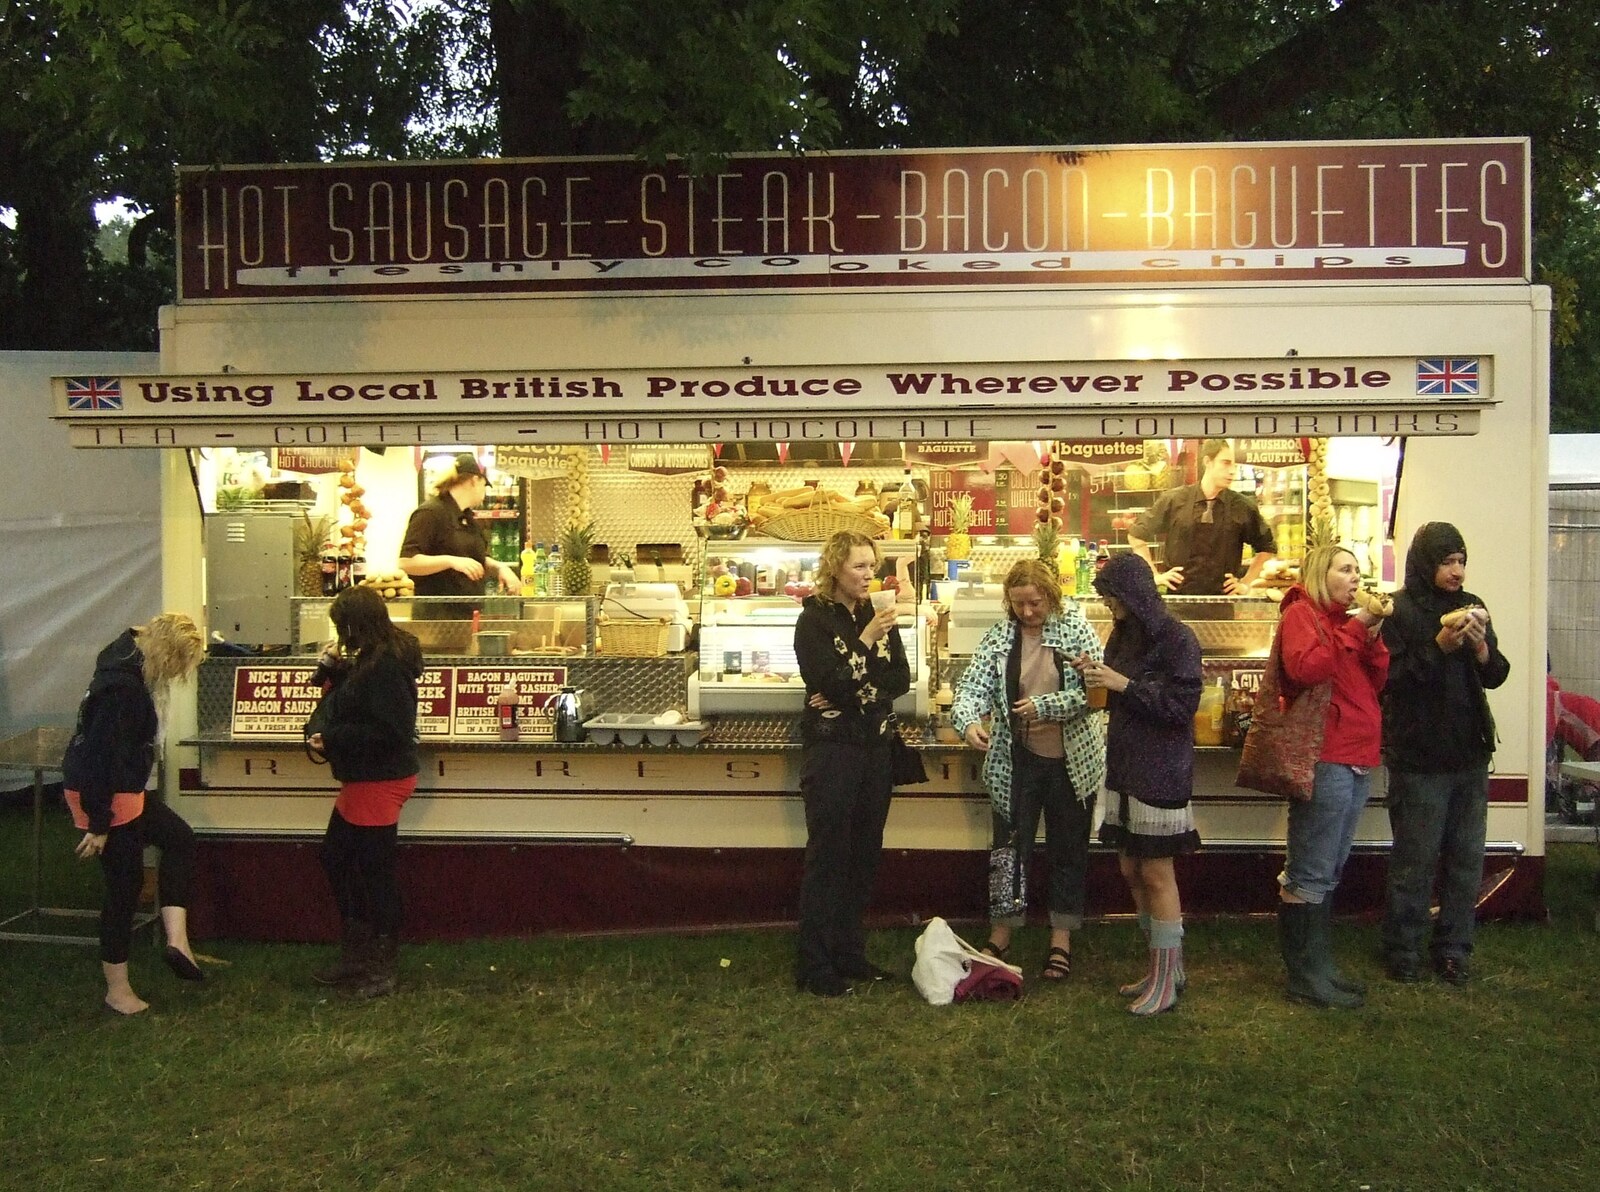 A warmly-lit oasis of food from The Cambridge Folk Festival, Cherry Hinton Hall, Cambridge - 1st August 2009